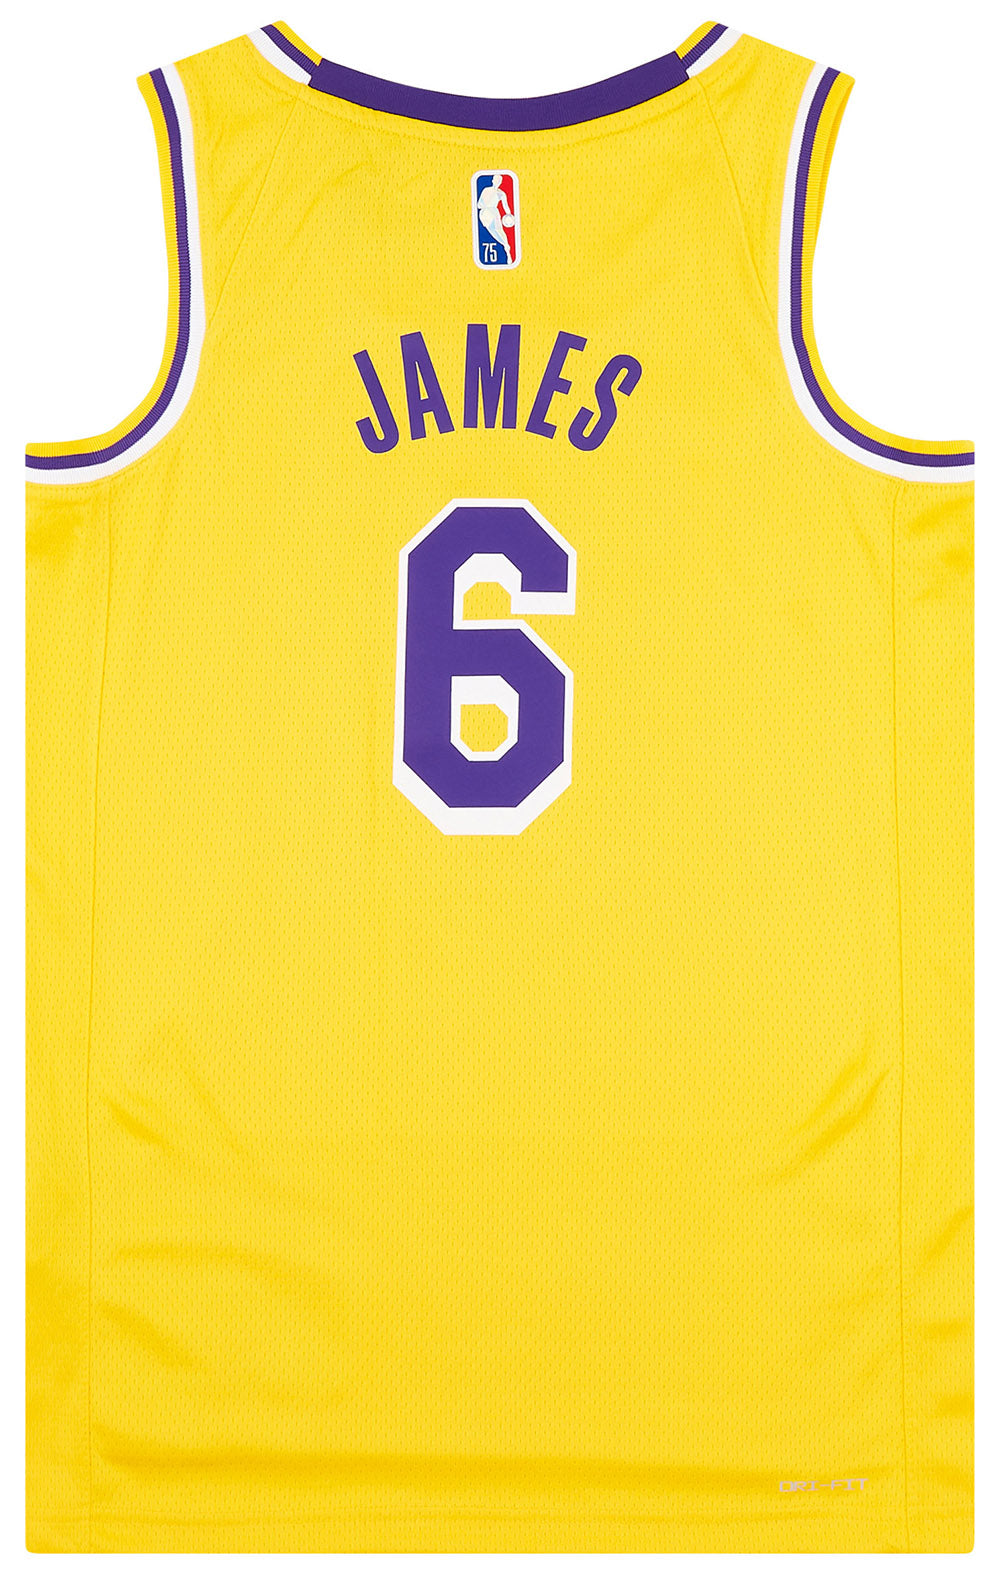 Los Angeles Lakers 2016-2017 Throwback Jersey